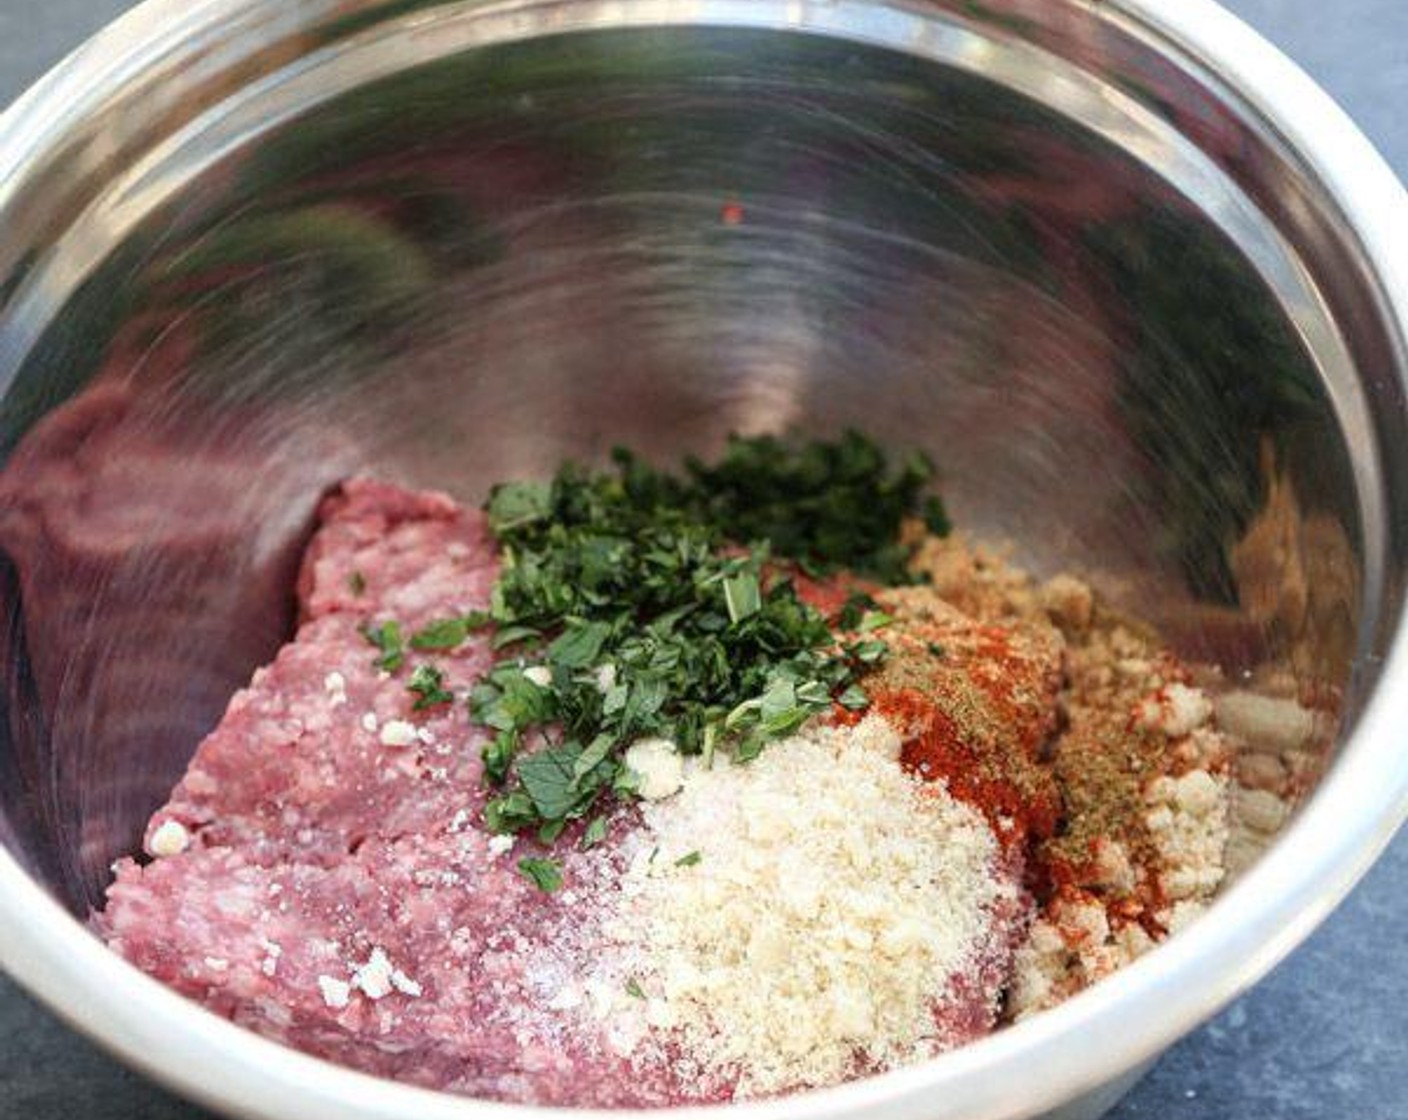 step 2 In a medium mixing bowl, combine the Ground Lamb (1 lb), Almond Meal (1/4 cup), Egg (1), Tomato Paste (1 Tbsp), Sea Salt (1 tsp), Ground Cumin (1/4 tsp), Ground Ginger (1/4 tsp), Smoked Paprika (1/4 tsp) and Cayenne Pepper (1 pinch). With clean hands, mix the lamb until well combined, making sure not to overly break apart the meat.